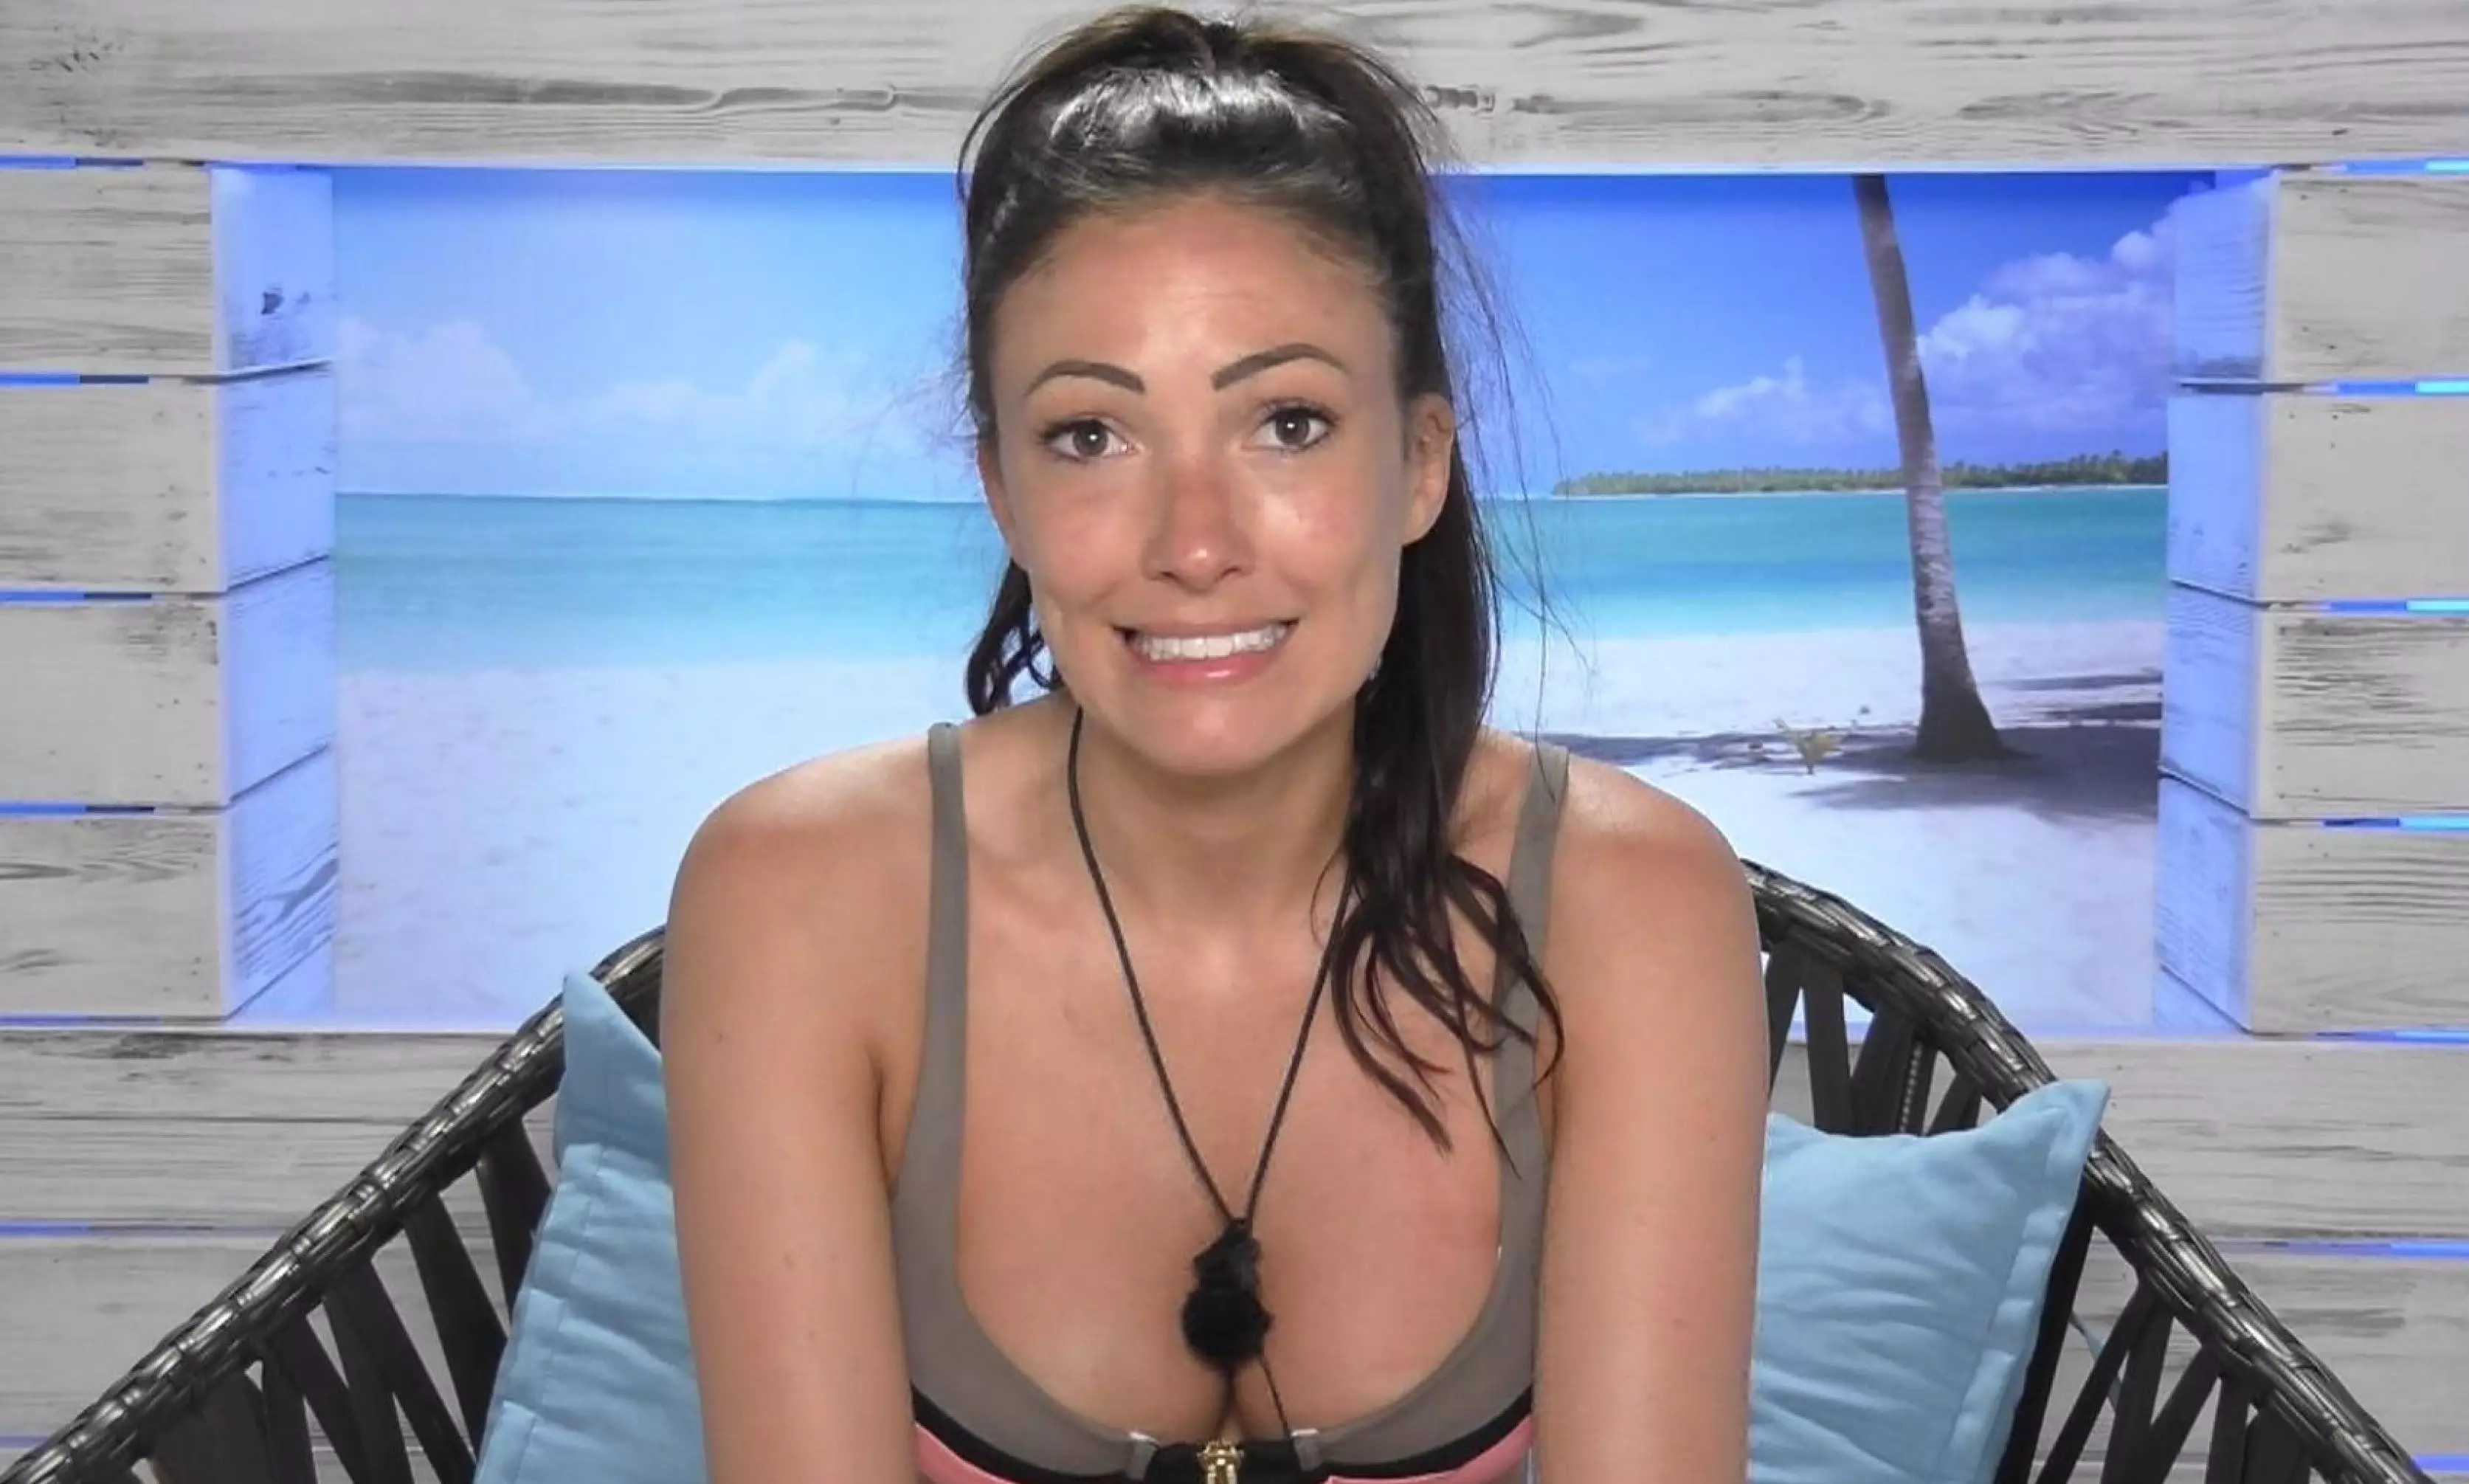 Former Love Island contestant Sophie Gradon committed suicide in 2018 (